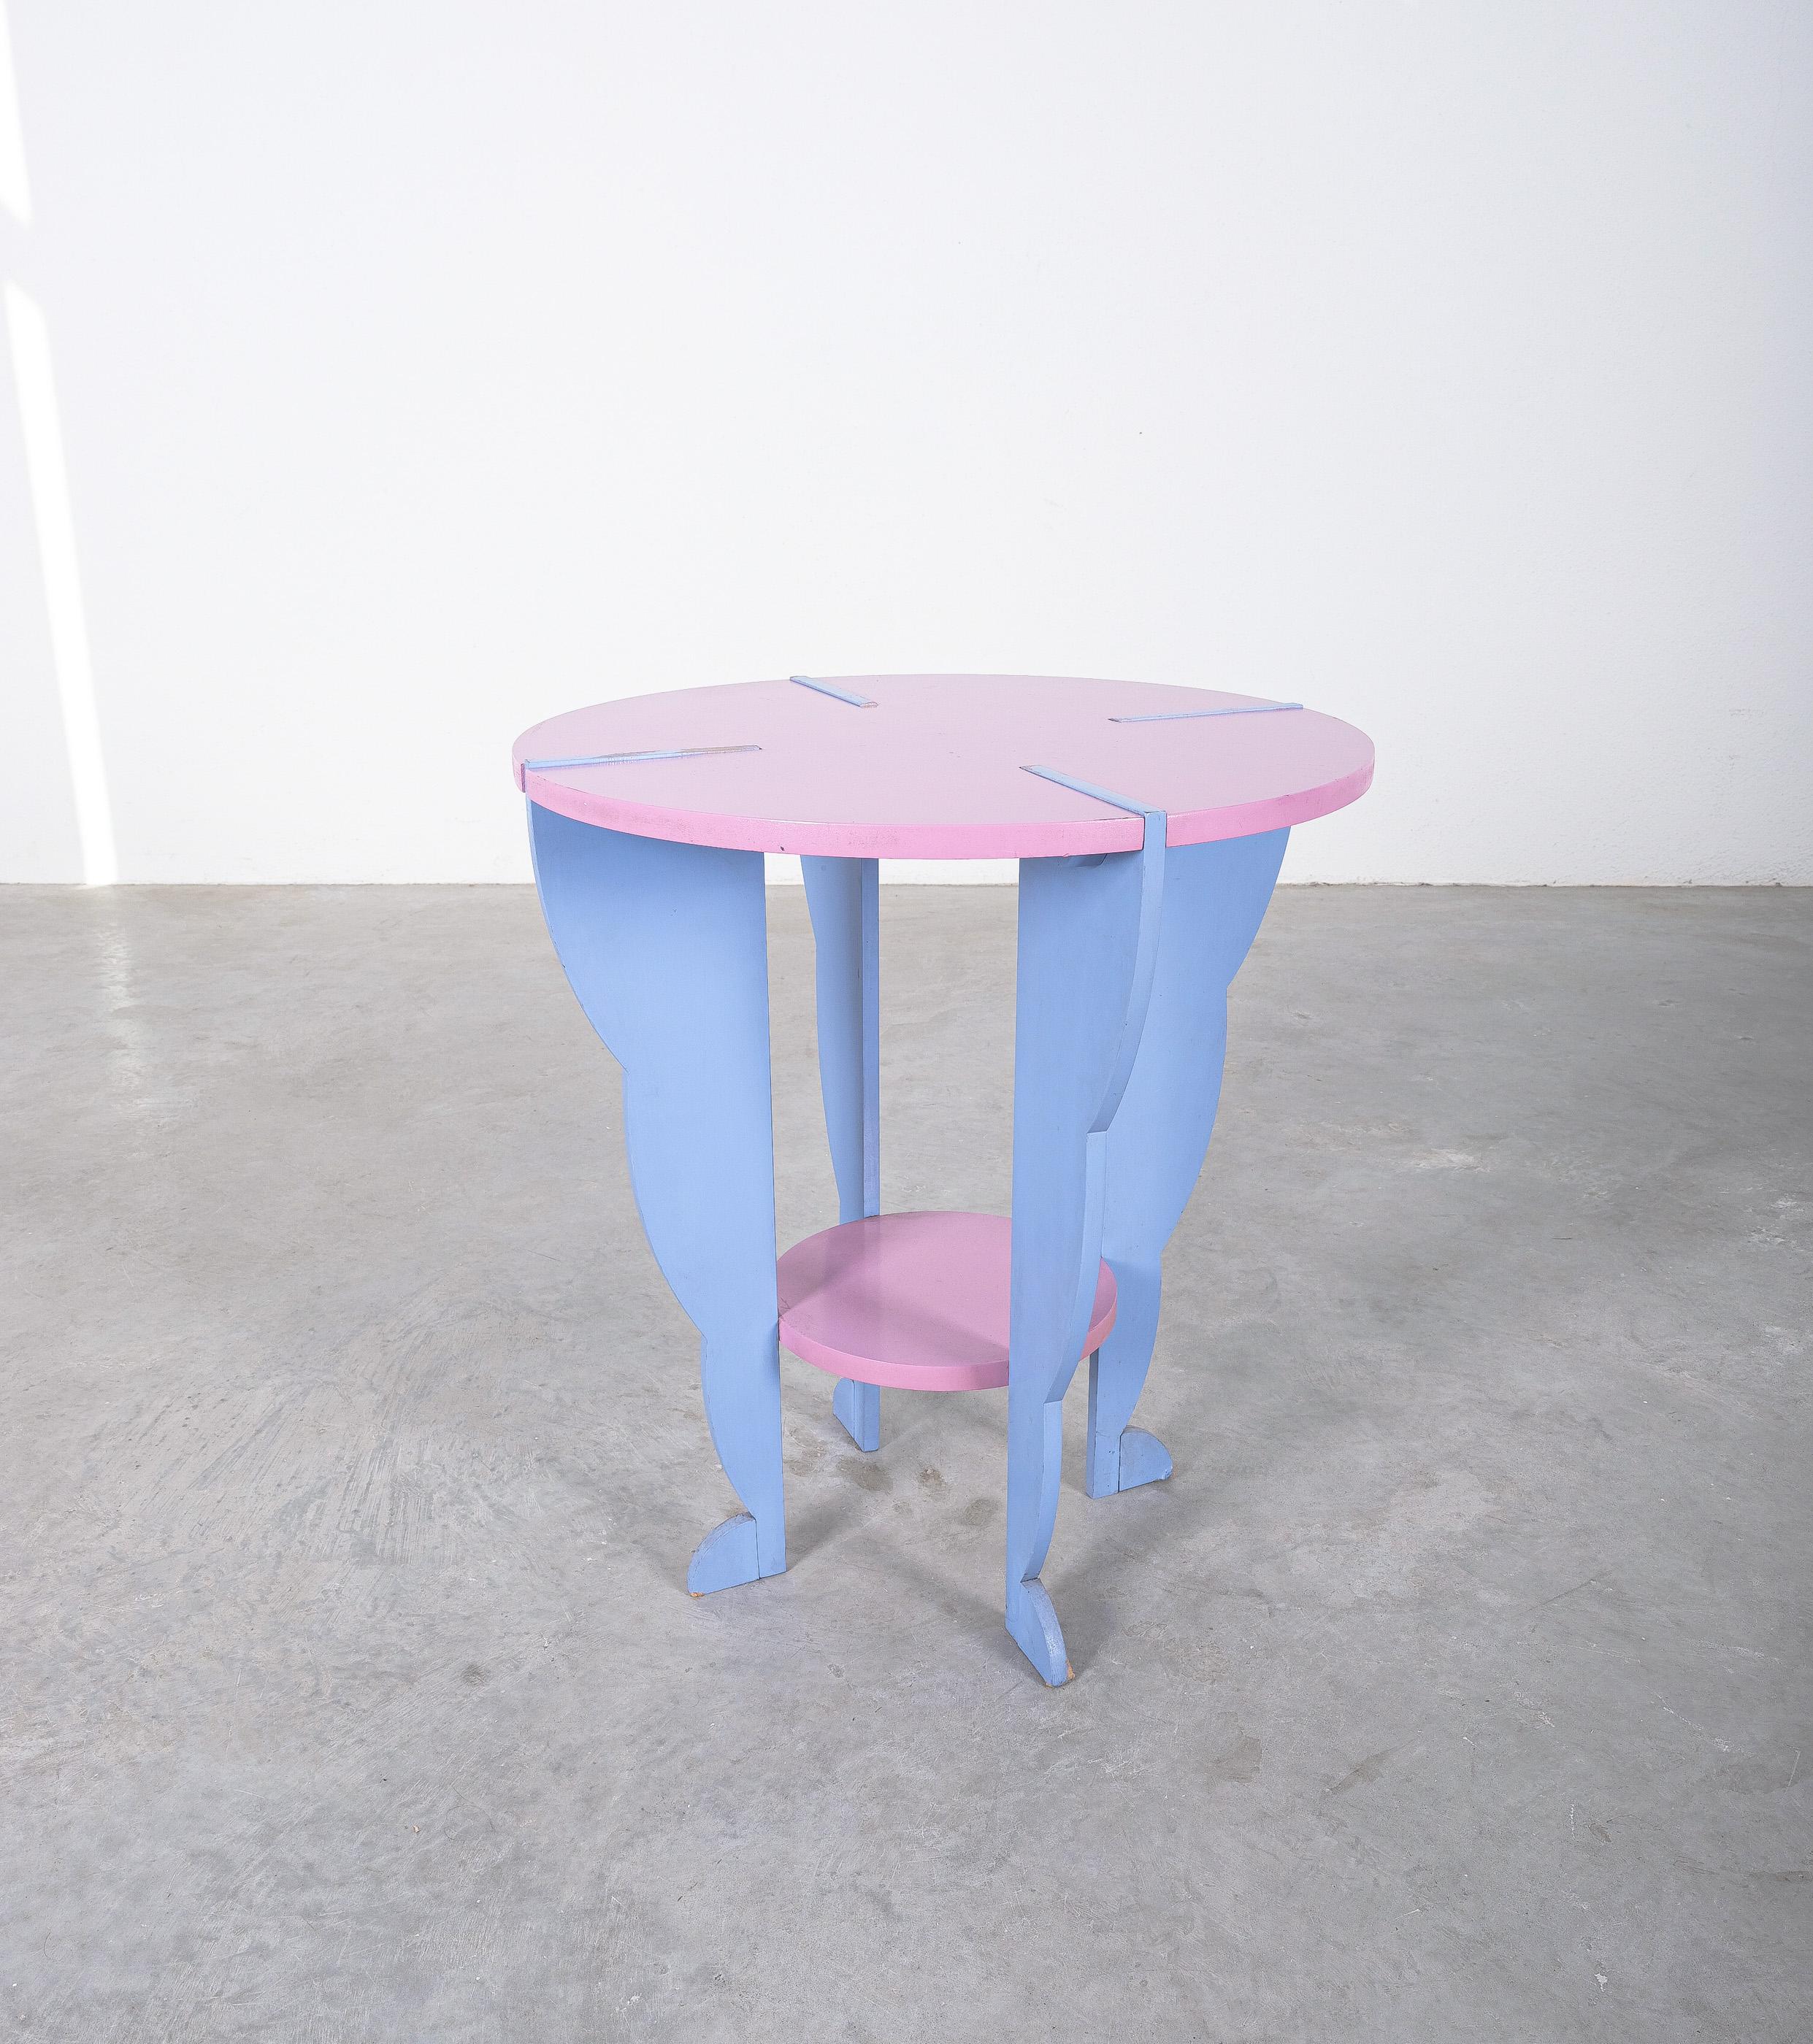 Ugo La Pietra Side Table Flessuosa Series Busnelli Italy, Post Modern 1985 For Sale 1